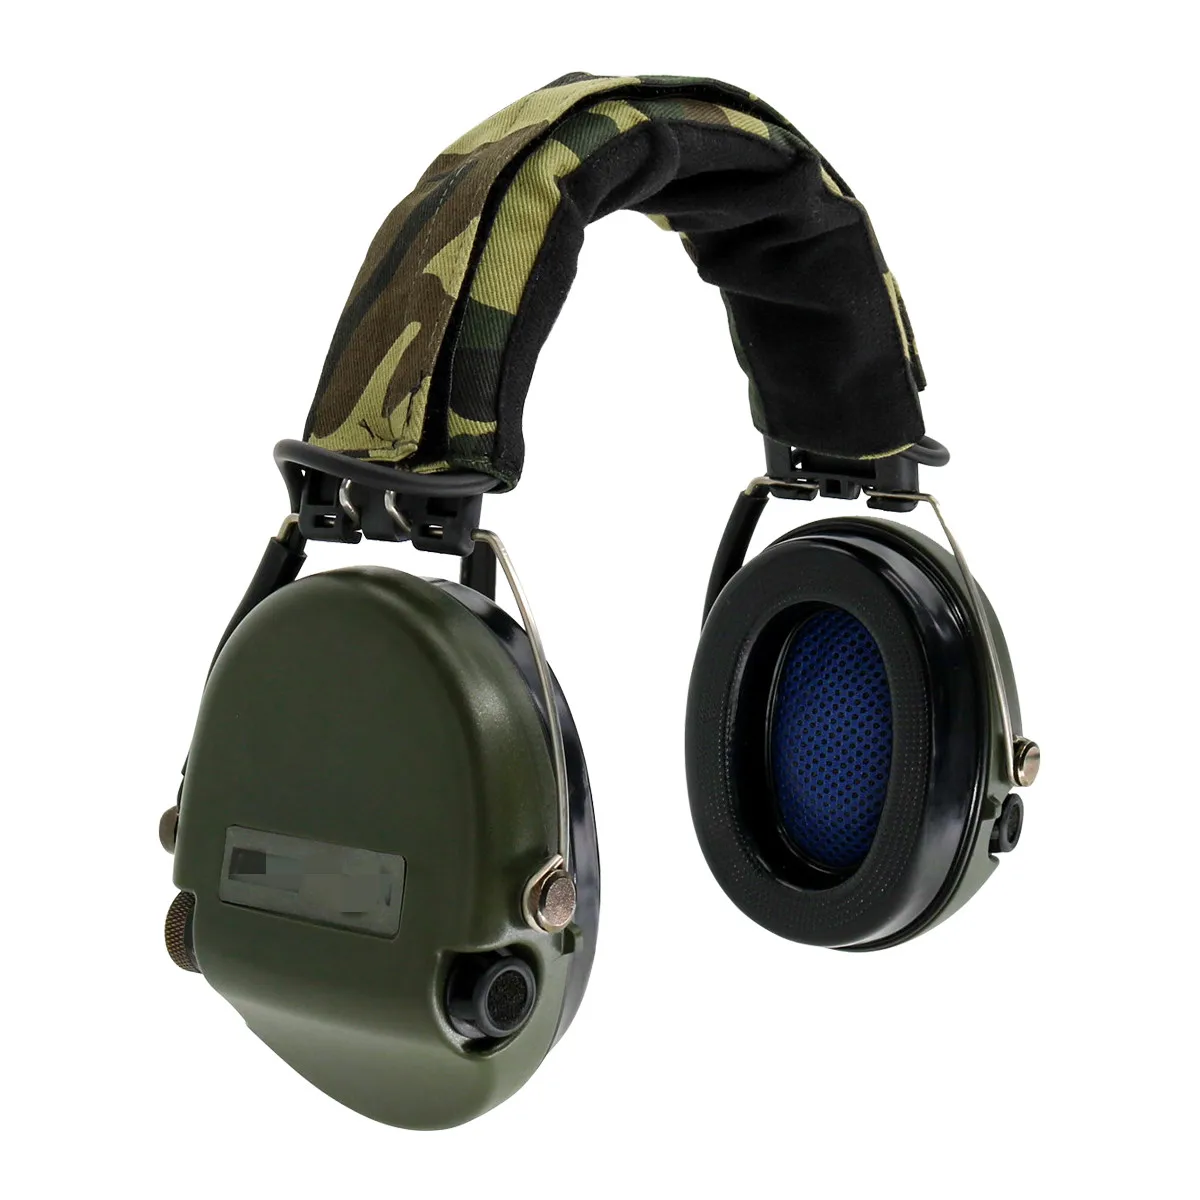 Tactical Airsoft MSASORDIN Headset No Communication Electronic Protective Earmuff Noise Reduction Shooting Tactical Headset enlarge